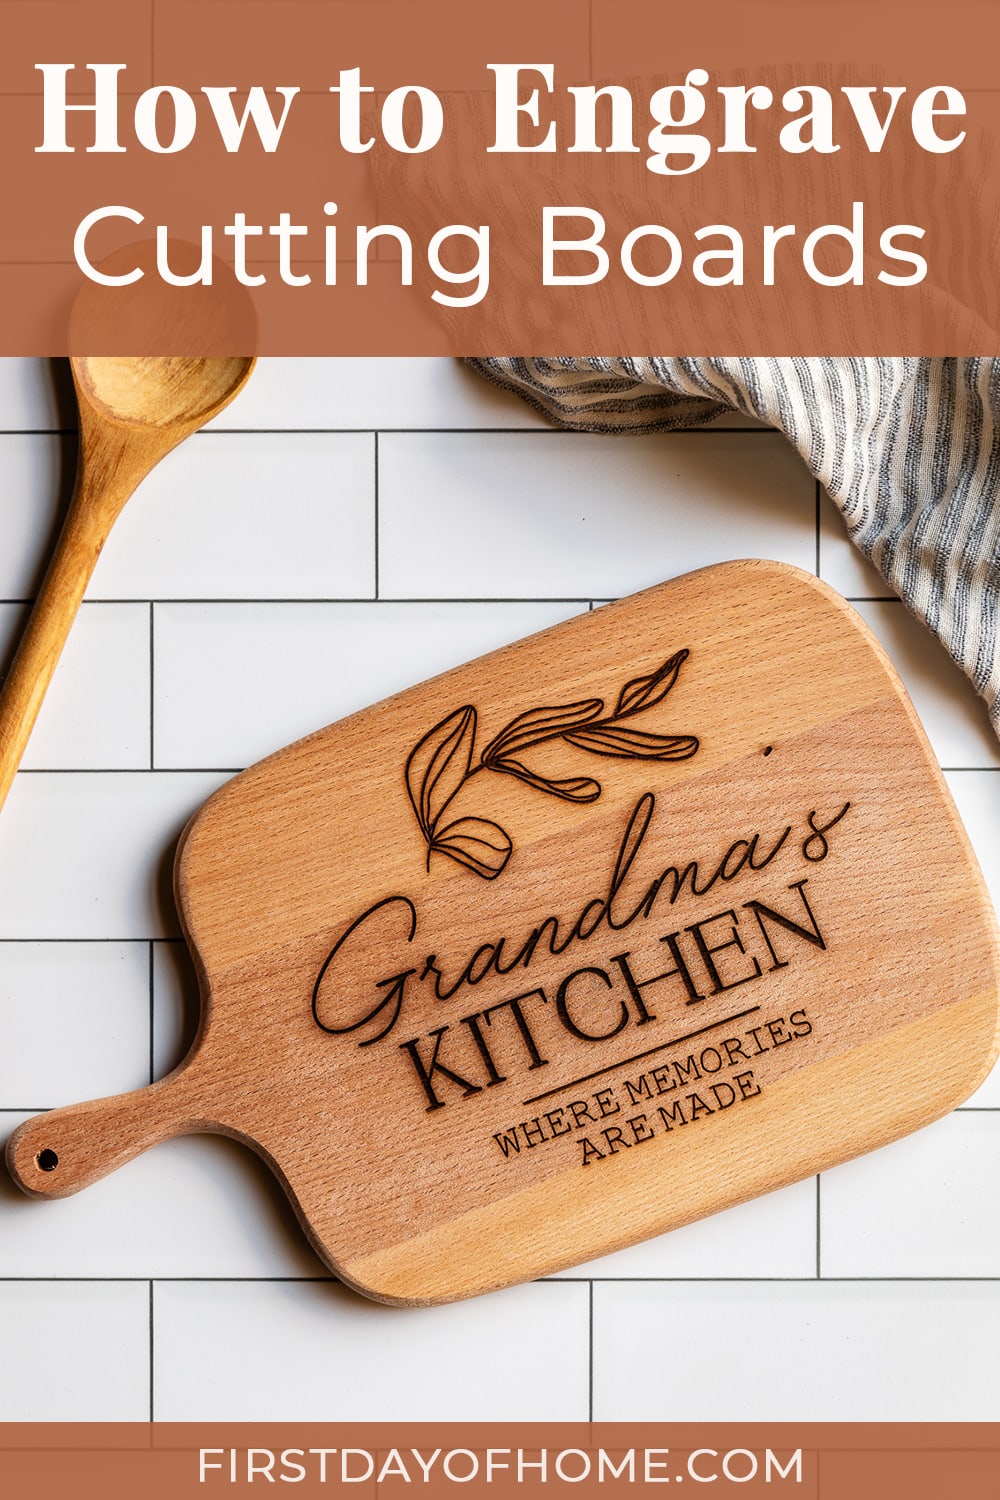 Engraved cutting board that reads "Grandma's Kitchen: Where Memories are Made". Text overlay reads "How to Engrave Cutting Boards".